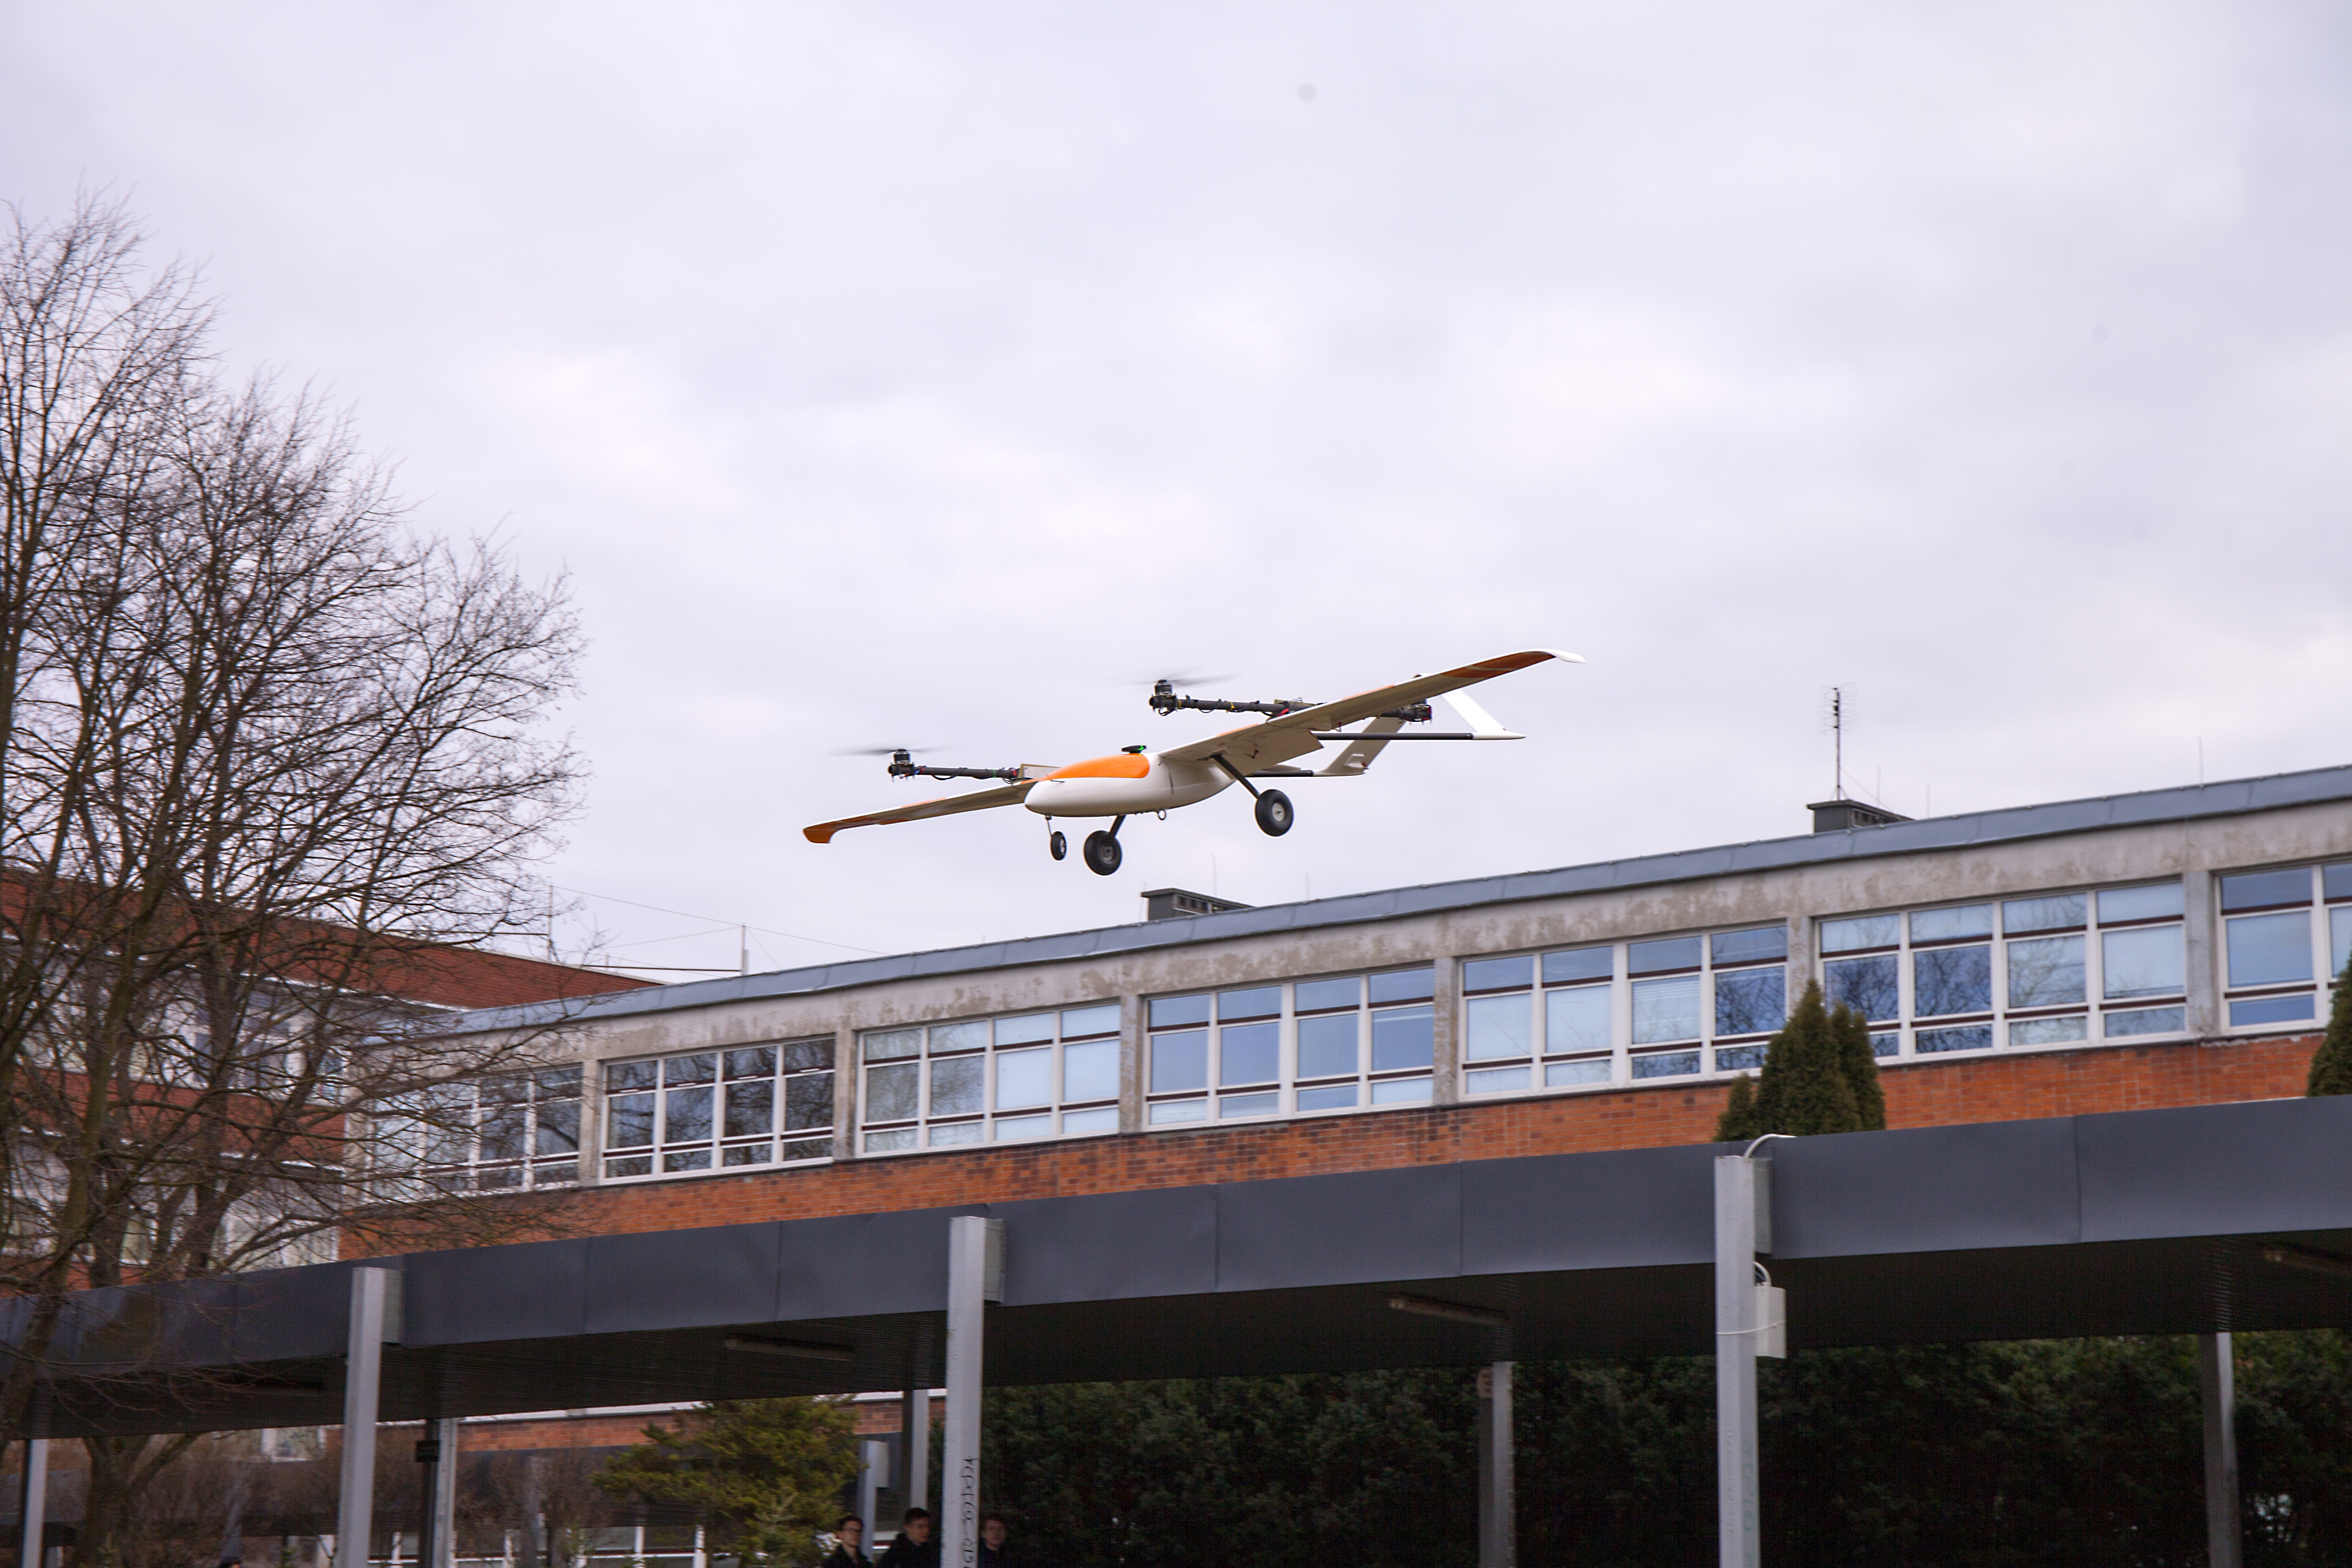 Tests of AVAL system components carried out at the Białystok University of Technology. In the photo, the drone is flying very low over the university building